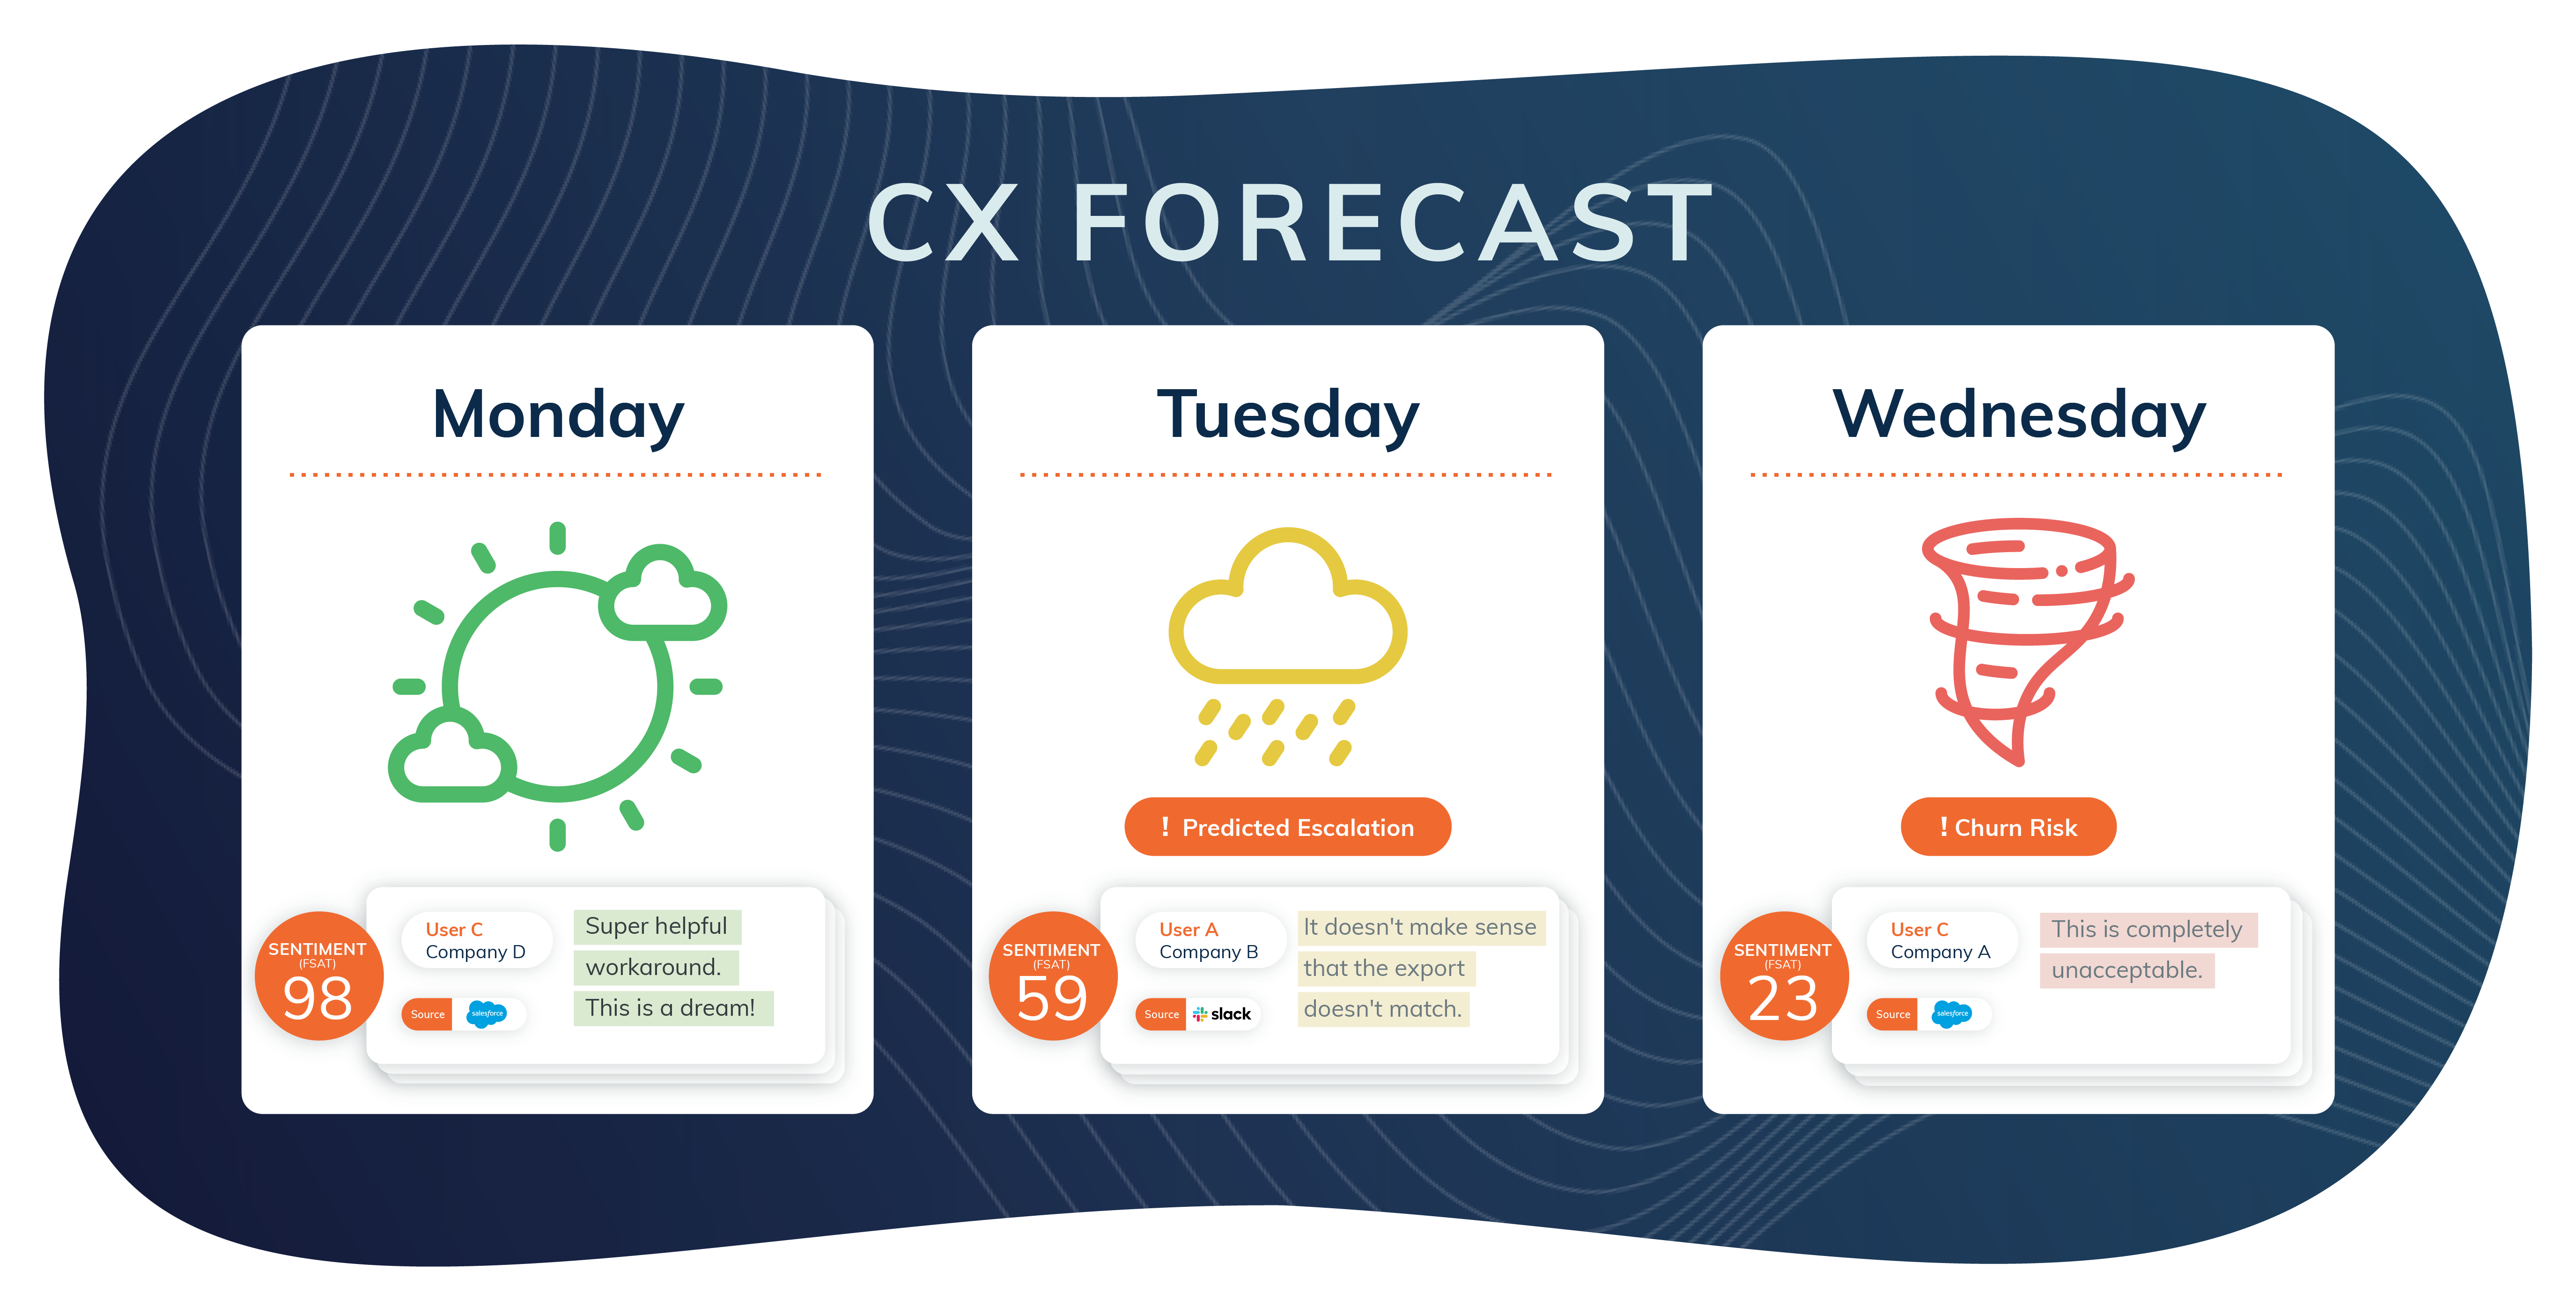 If Measuring CX was like a weather forecast...